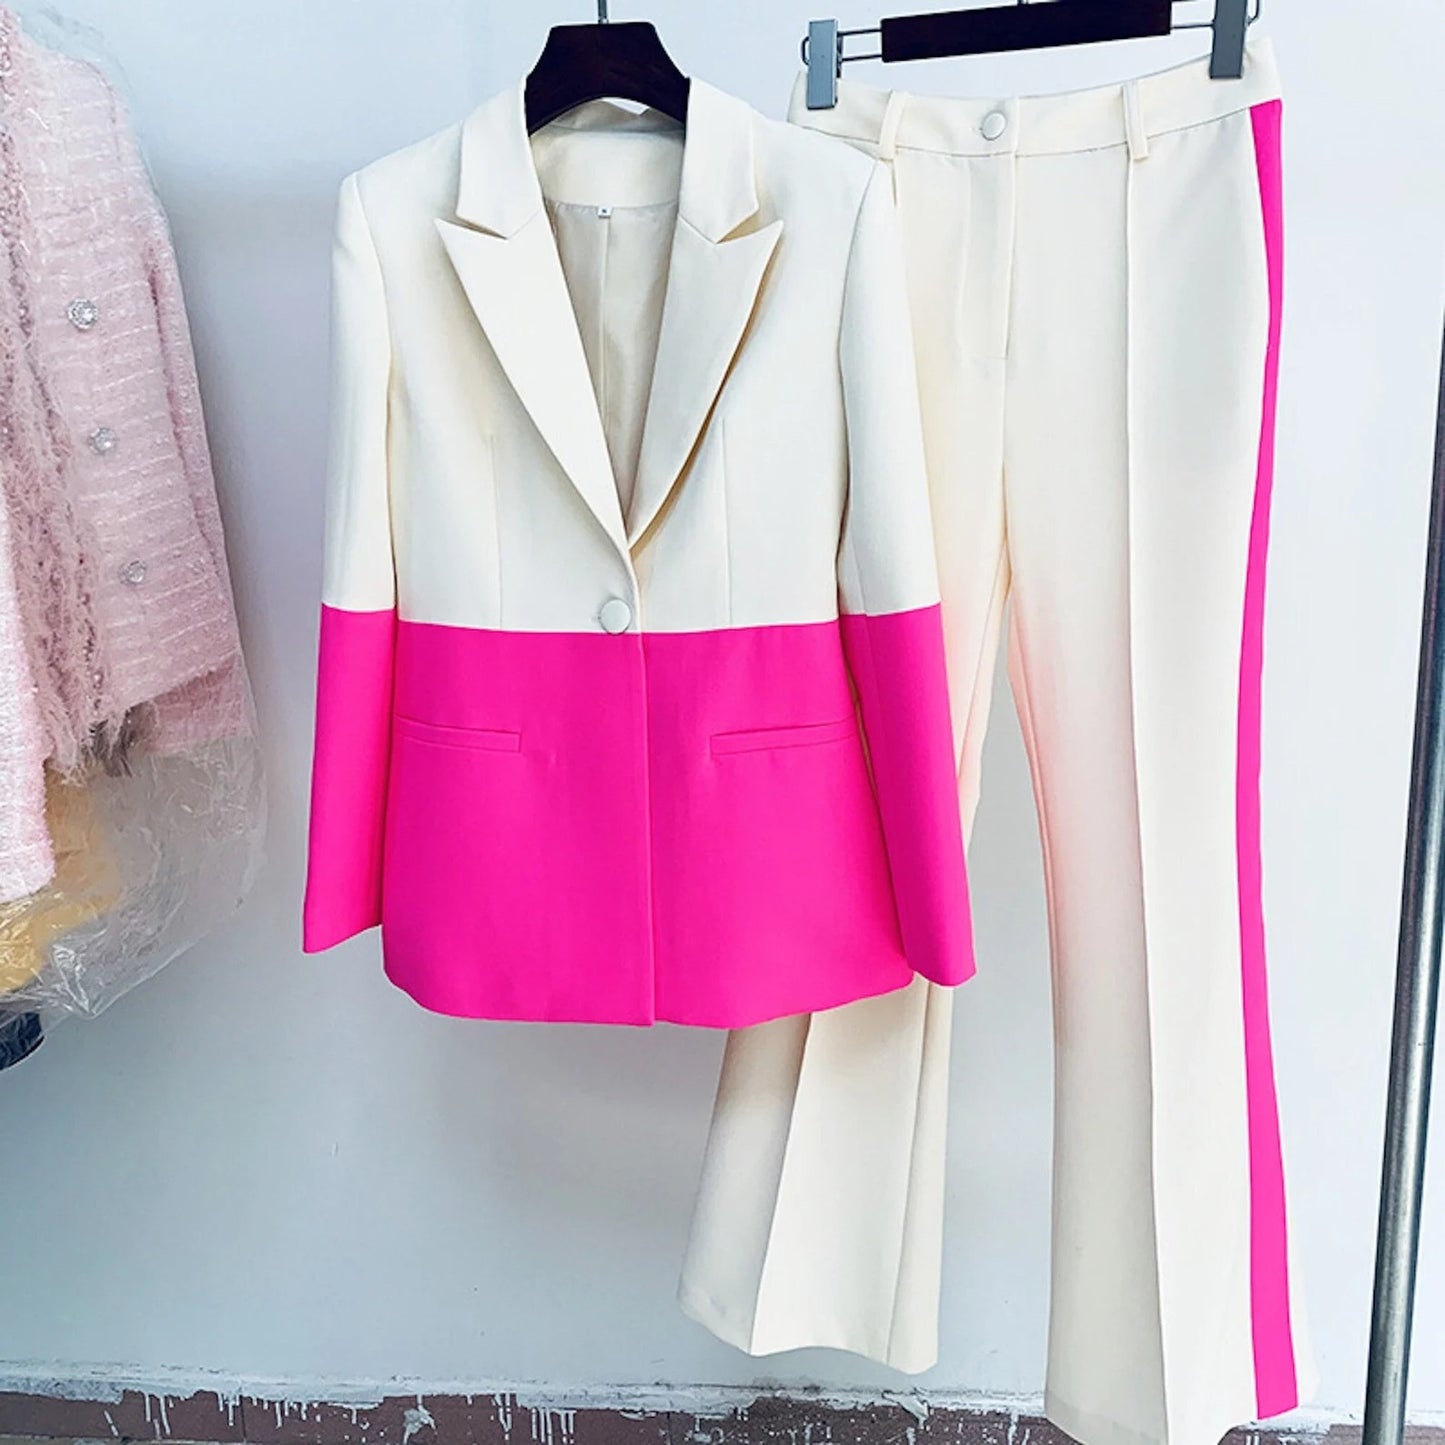 Suit for Women in Hot Pink Light Beige Blazer and Flare Trousers   Flared trousers suits are a great hit in the office this season! It's time to dress up in business casual with a twist!  This suit adds some fun to work clothes by adding color-blocked design.  Flare Trousers + Hot Pink Light Beige Blazer for Women Women's suit blazer jacket coat outerwear top. Cotton and polyester blend.